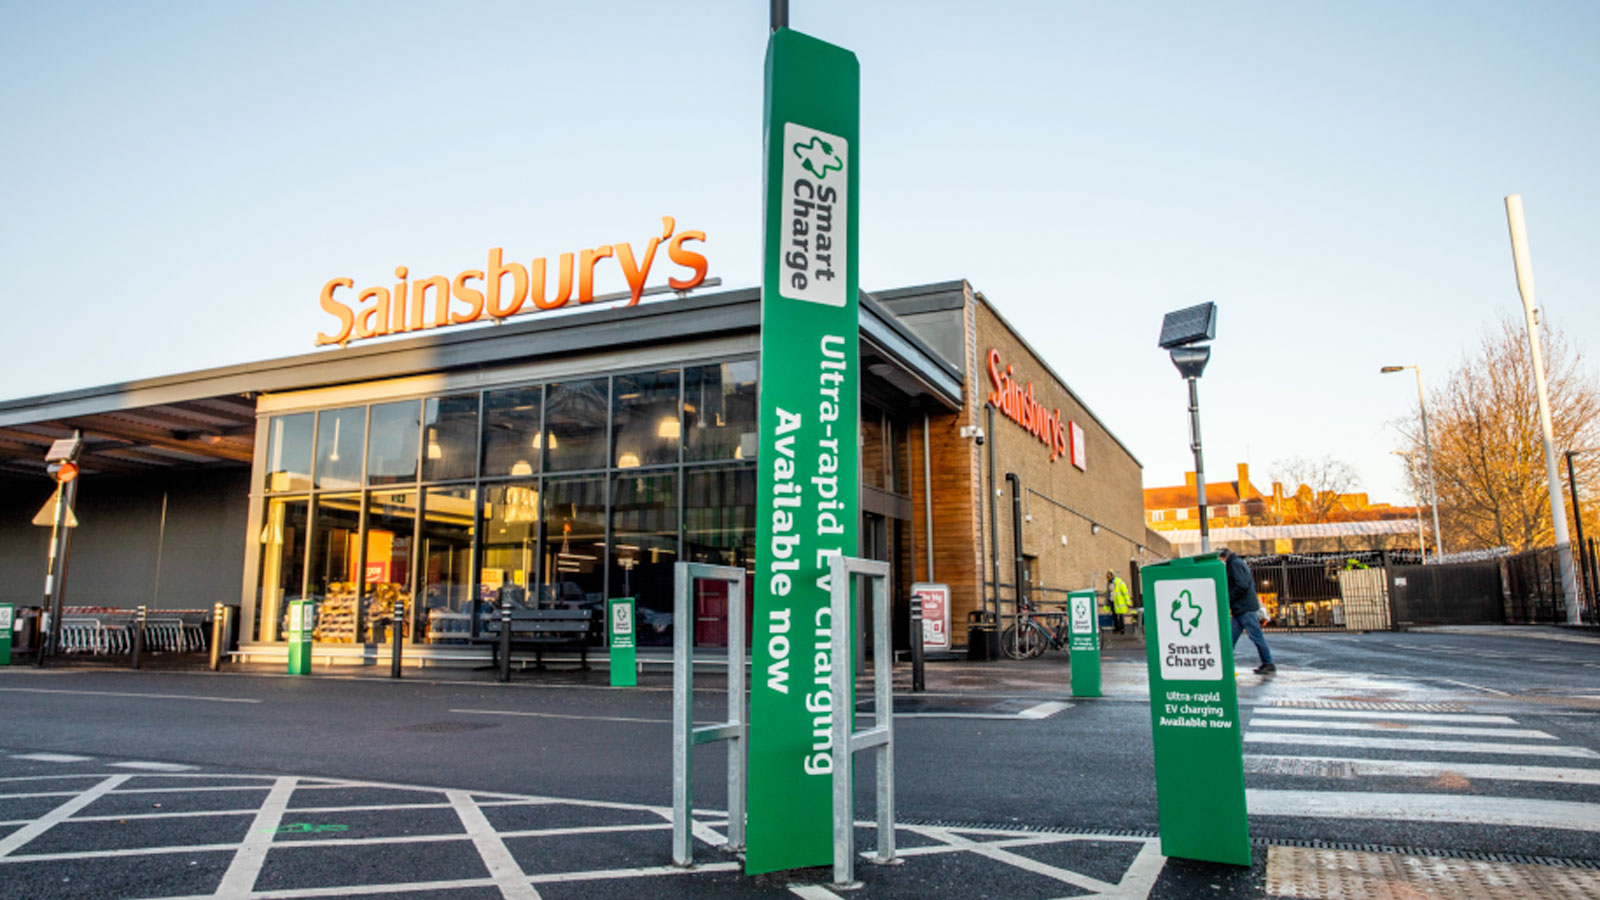 Sainsbury’s has announced Smart Charge, the first EV charging network run by a UK supermarket